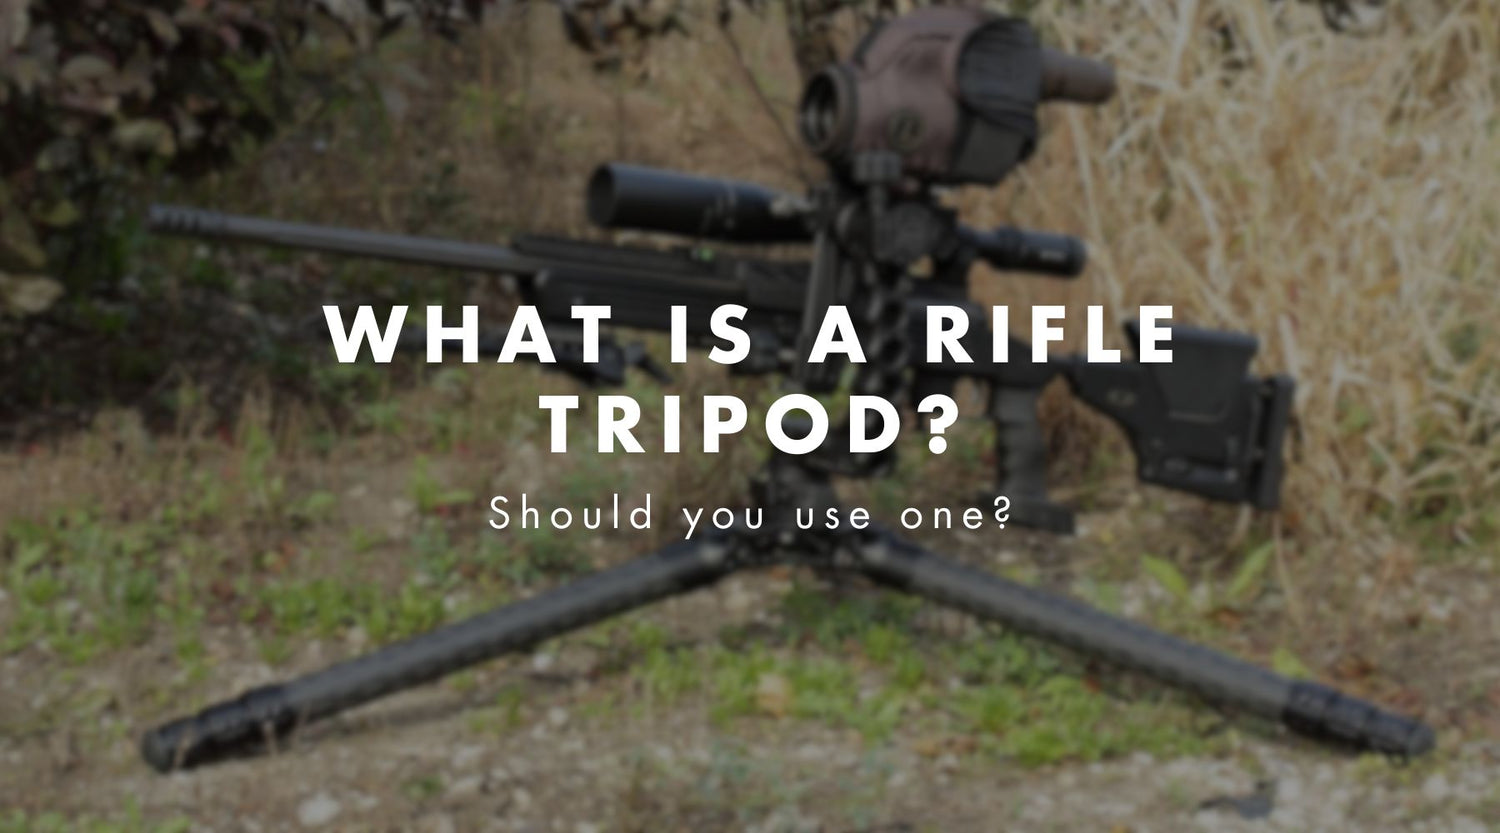 What is a rifle tripod?